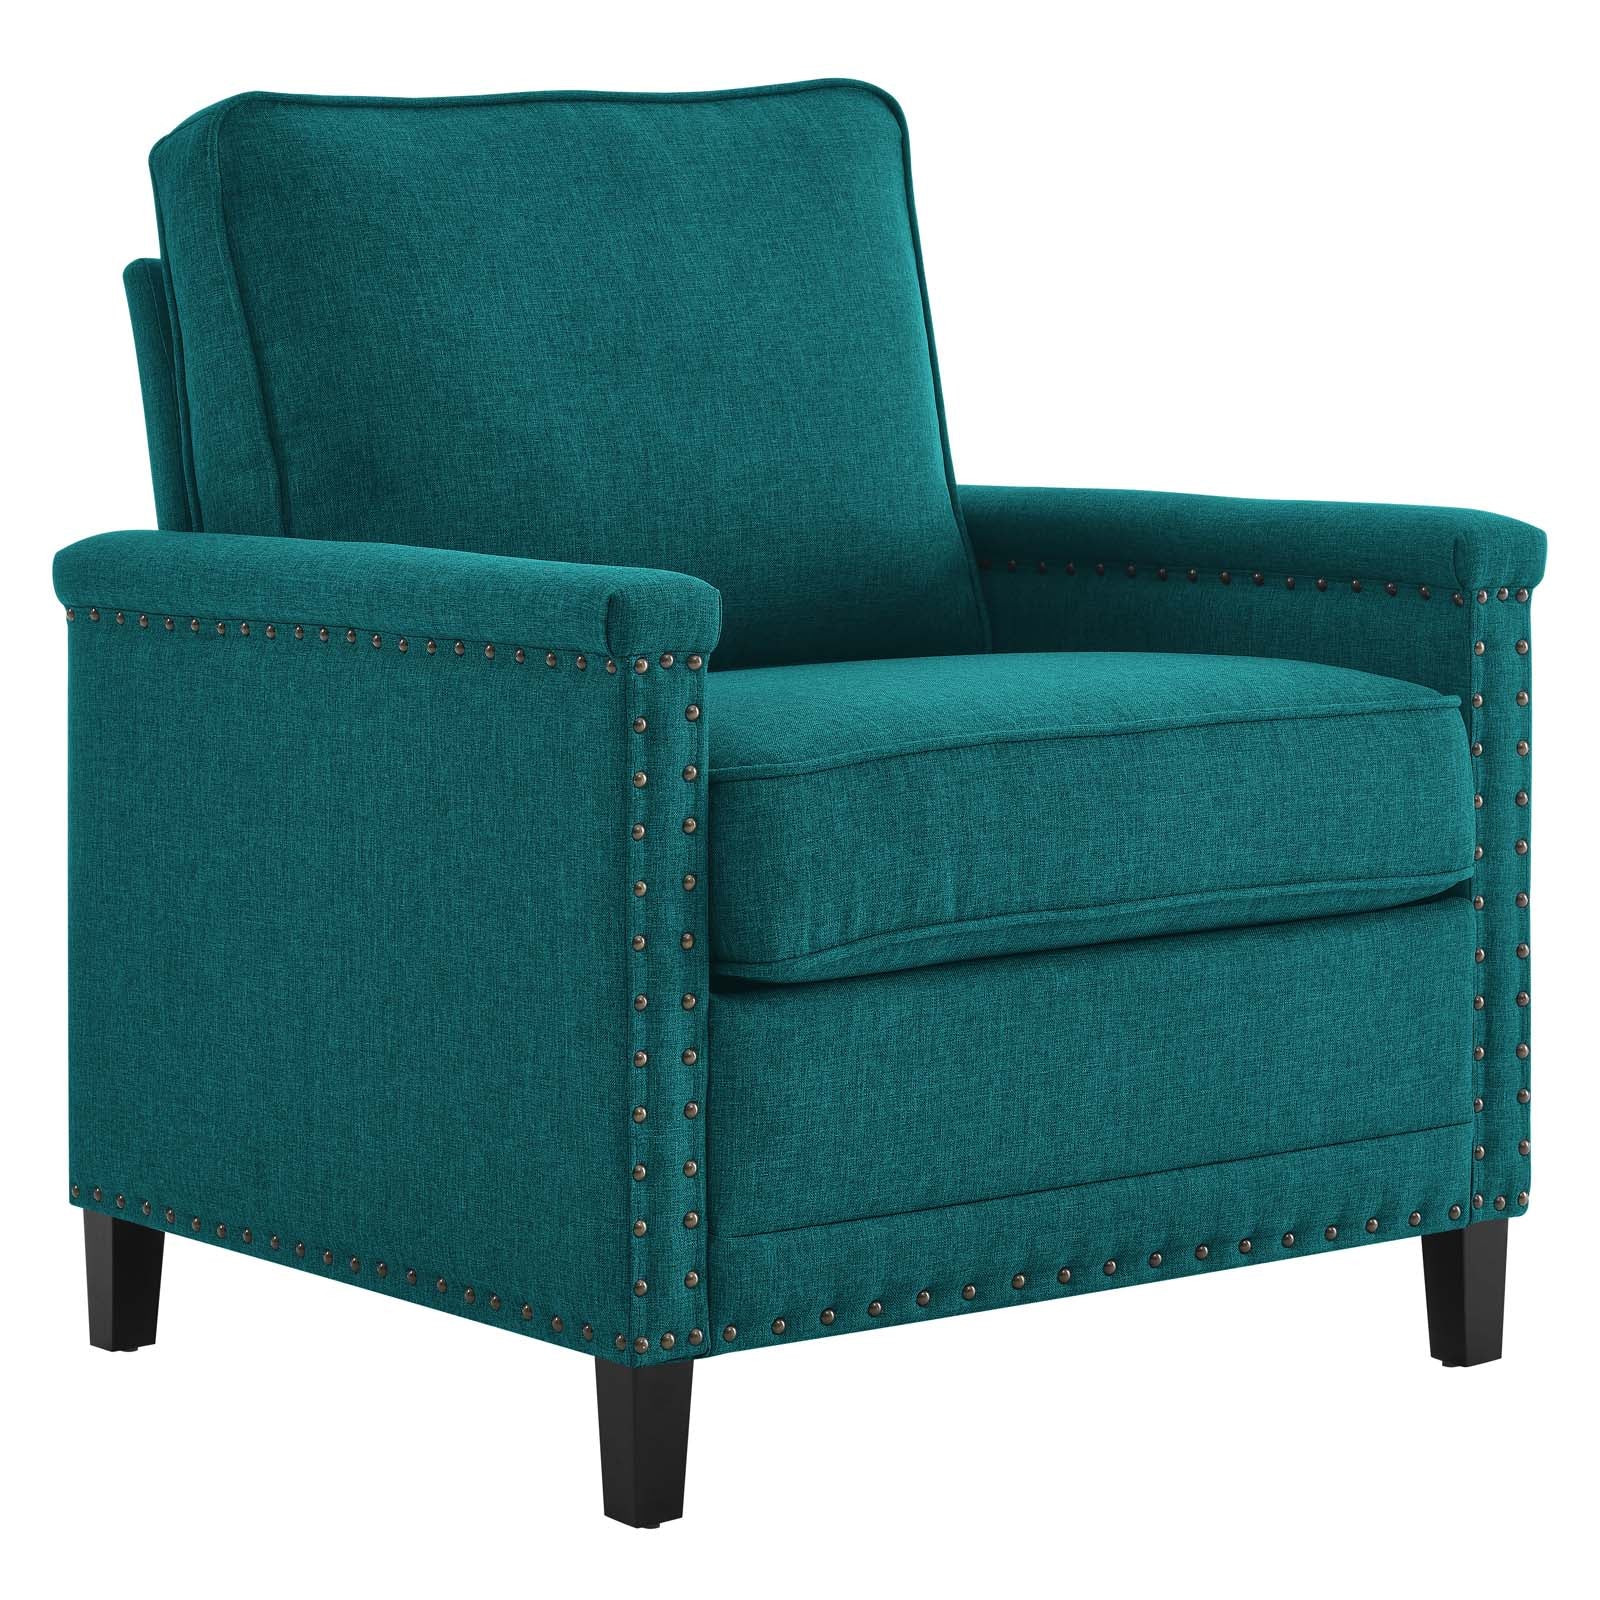 Modway Accent Chairs - Ashton Upholstered Fabric Armchair Teal